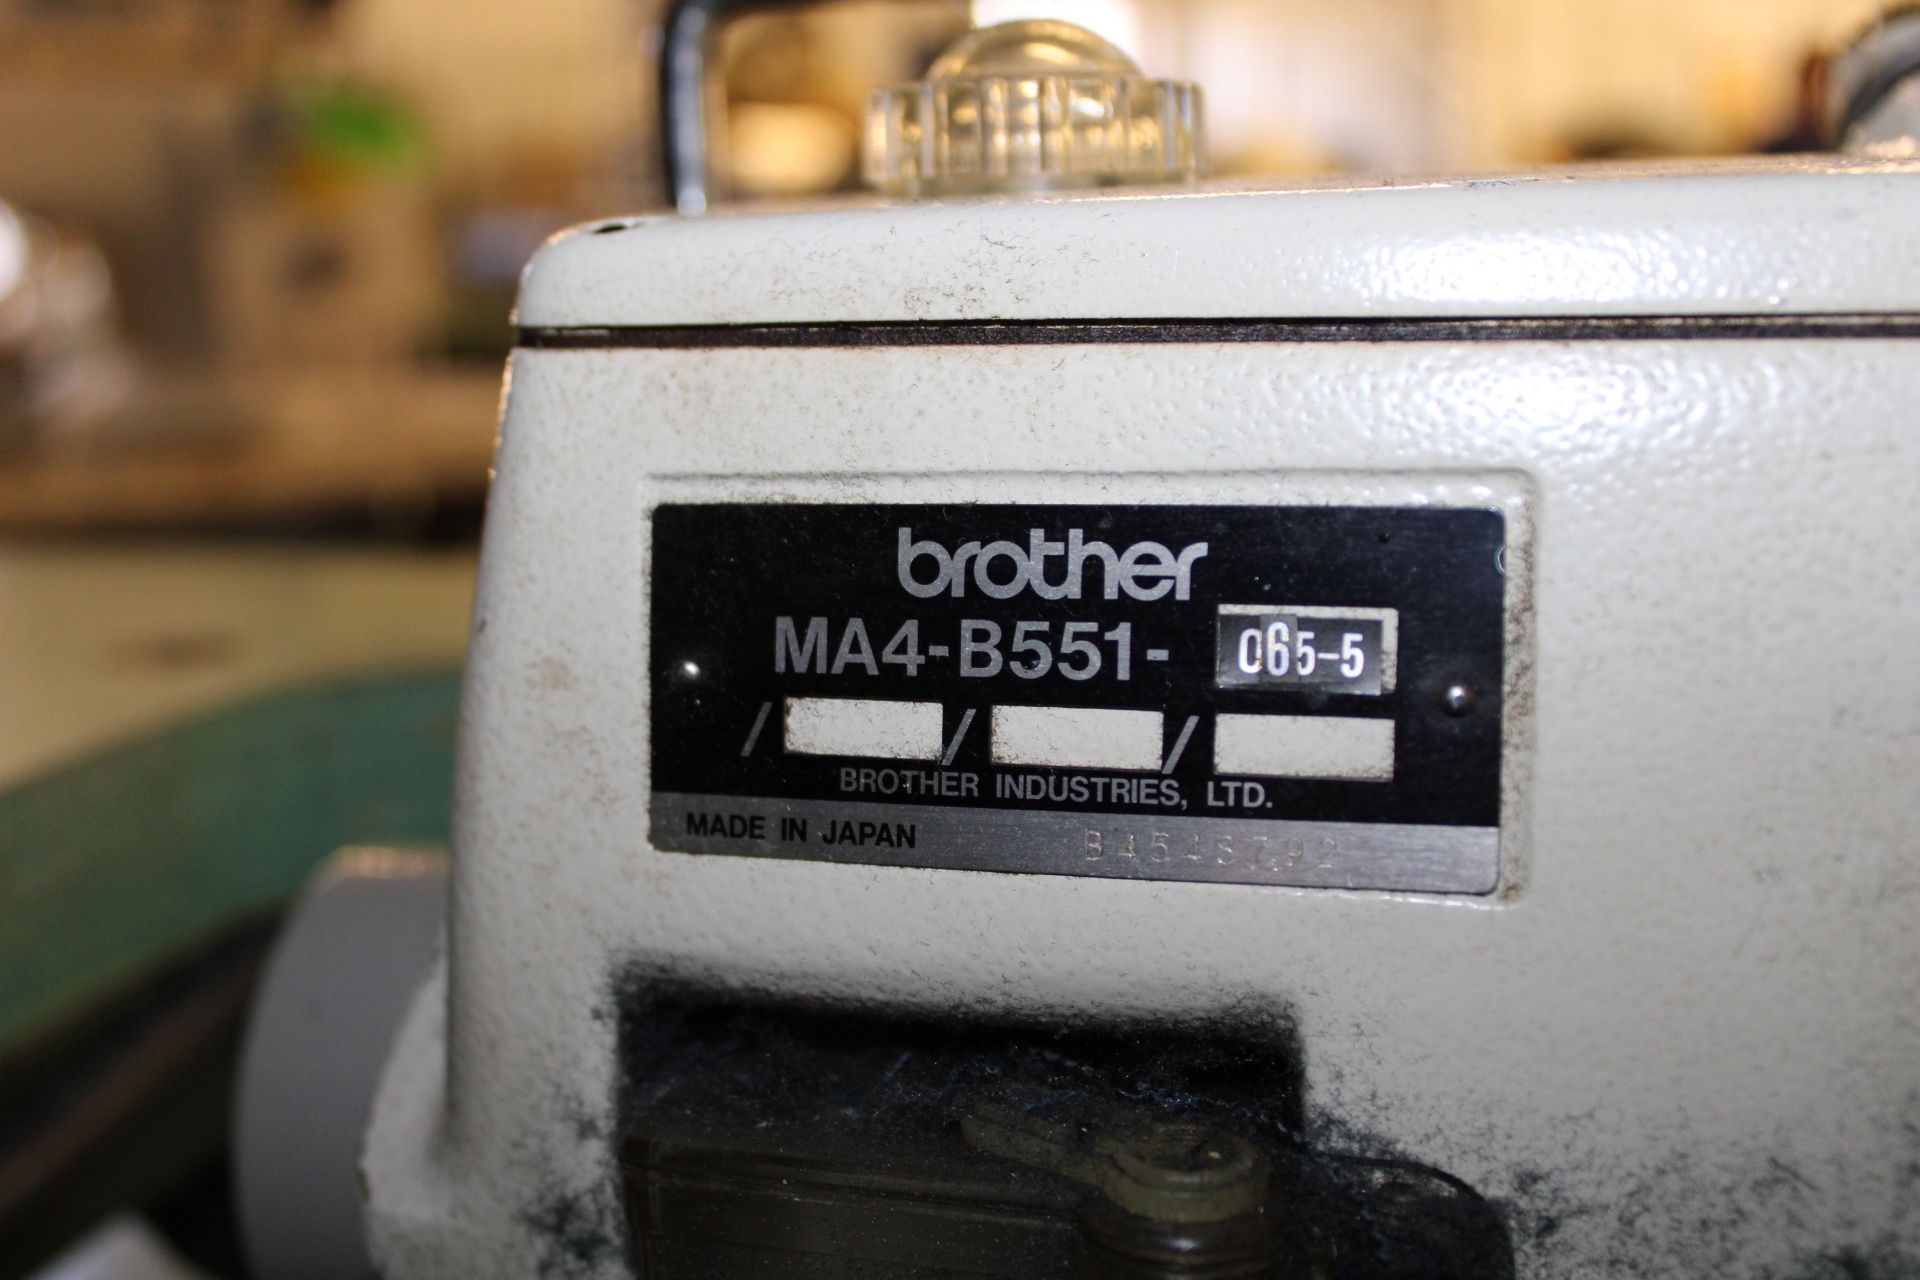 BROTHER mod. MA4-B551-065-5 industrial sewing machine, 110V, complete - Image 3 of 5